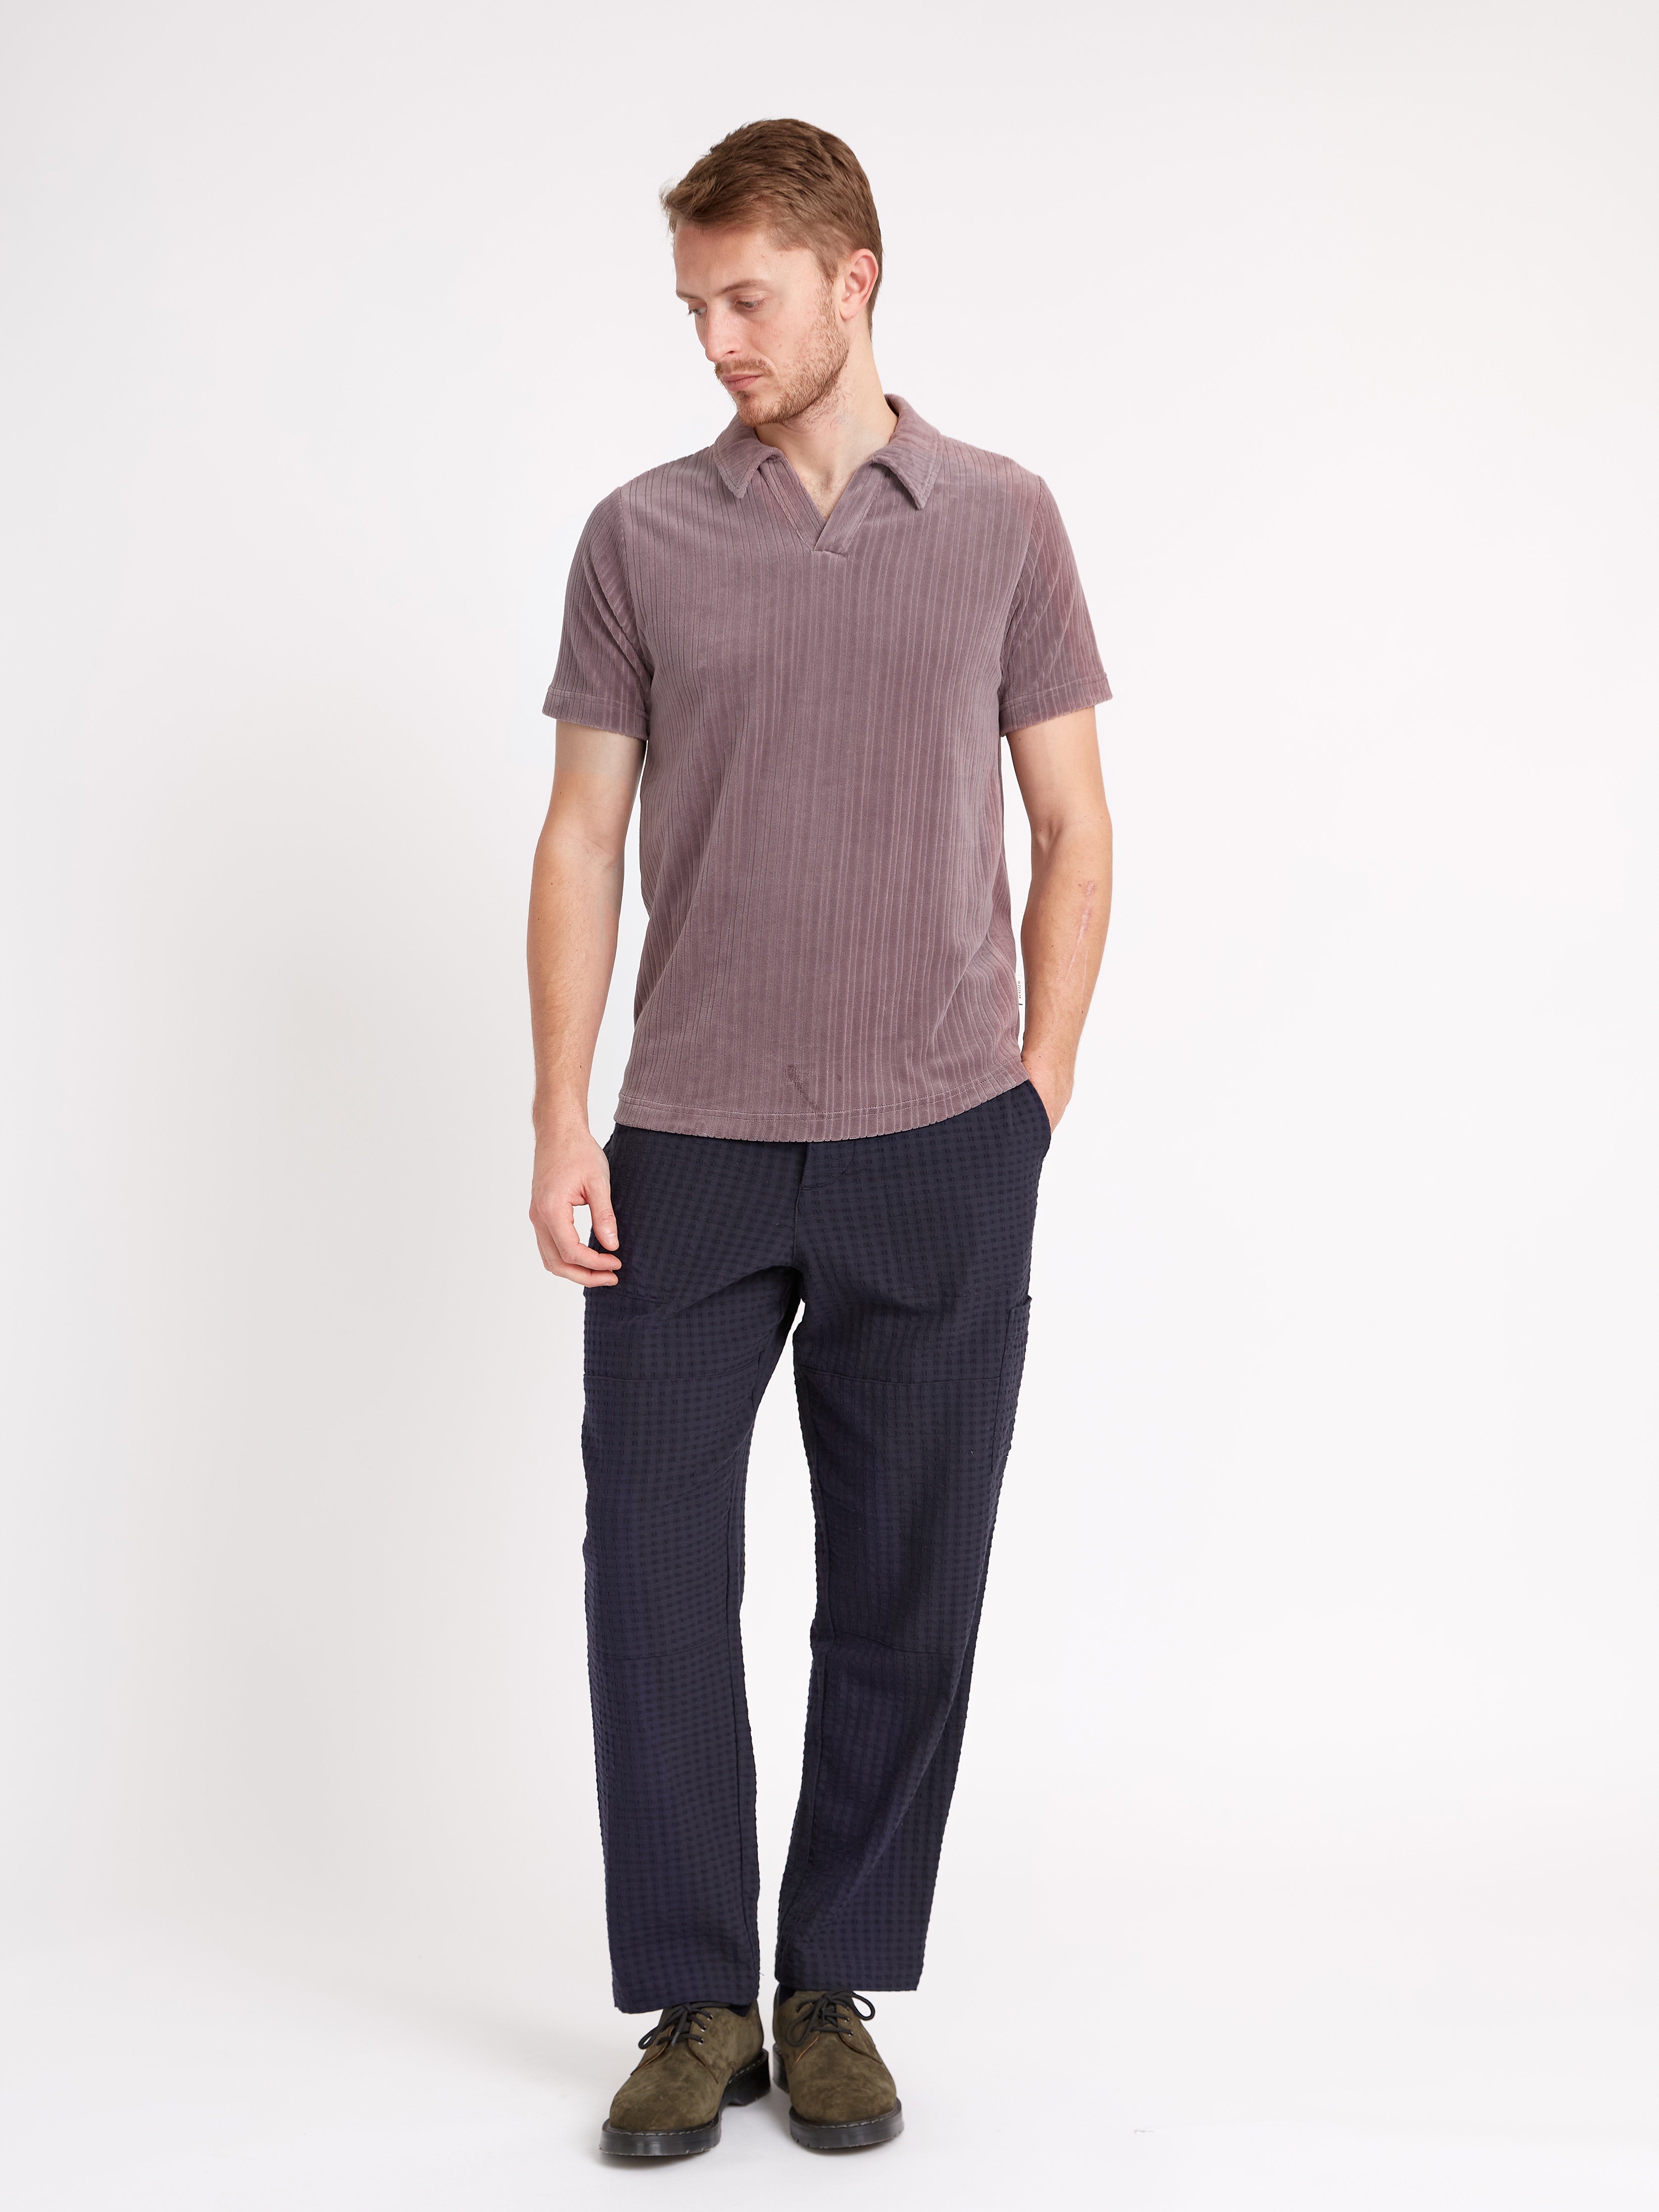 Men's T-Shirts and Polo-Shirts - Menswear – Oliver Spencer